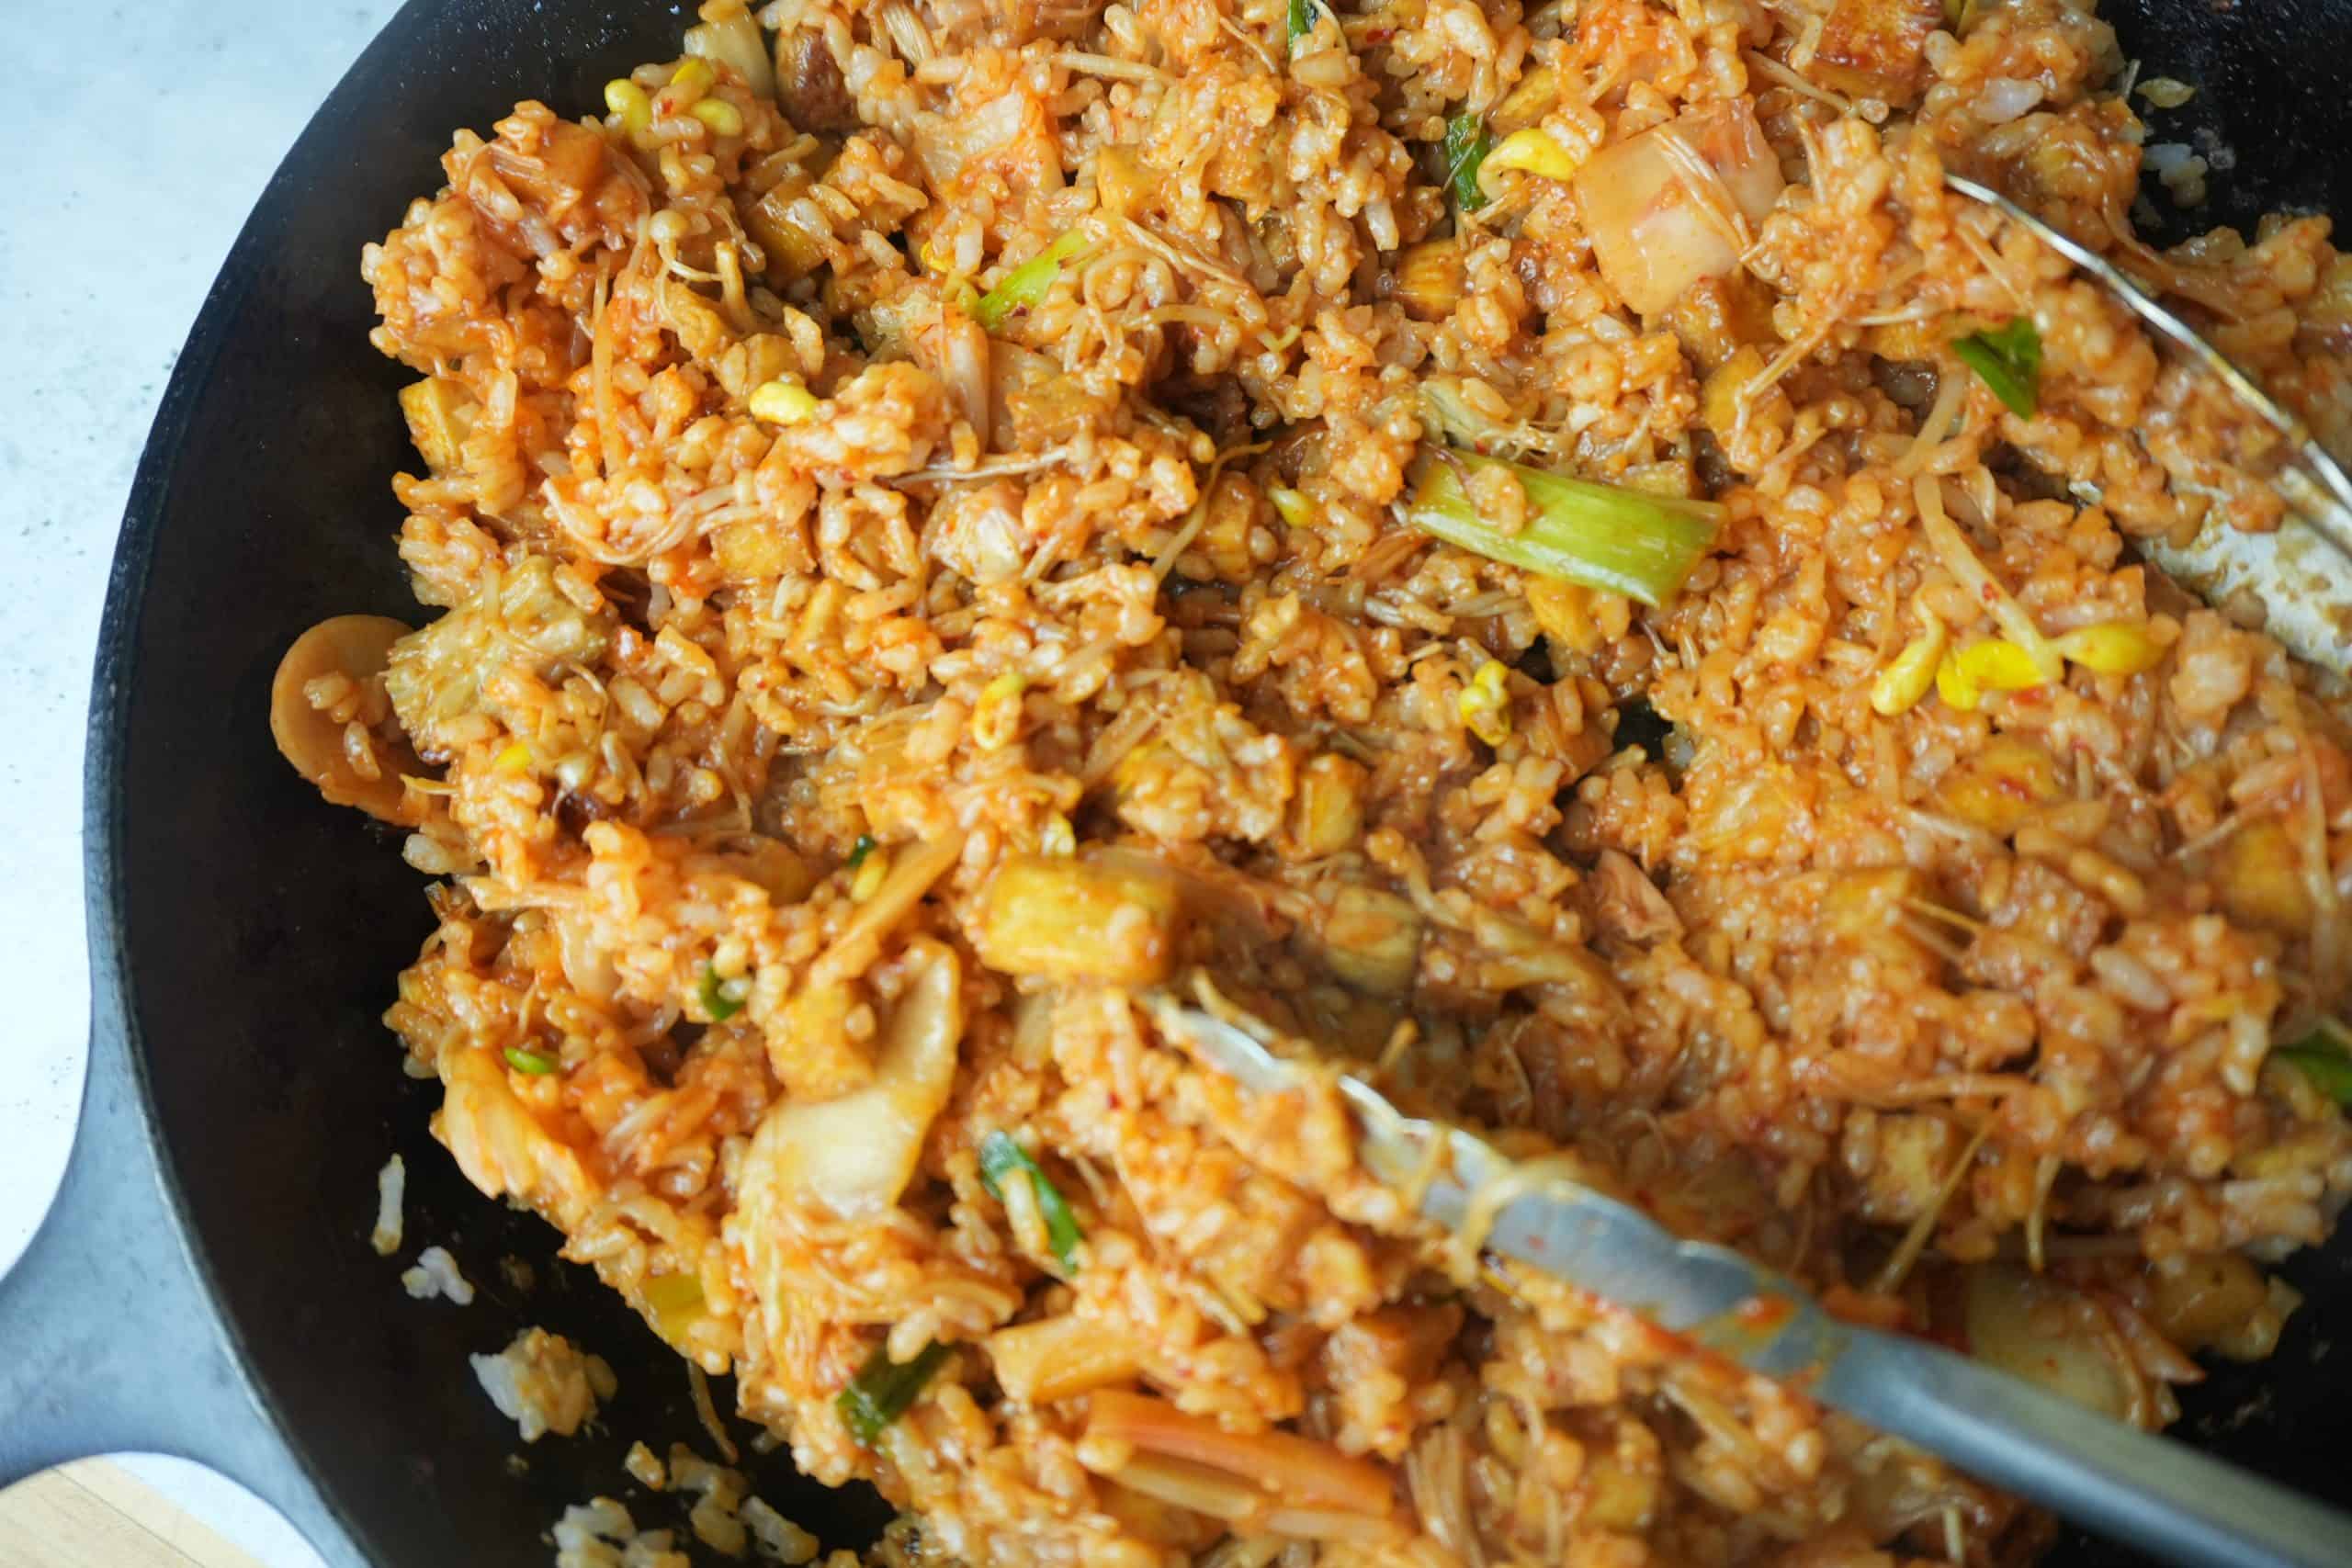 All of the ingredients for vegan kimchi fried rice stir frying together in a large cast iron skillet. Tongs in the pan